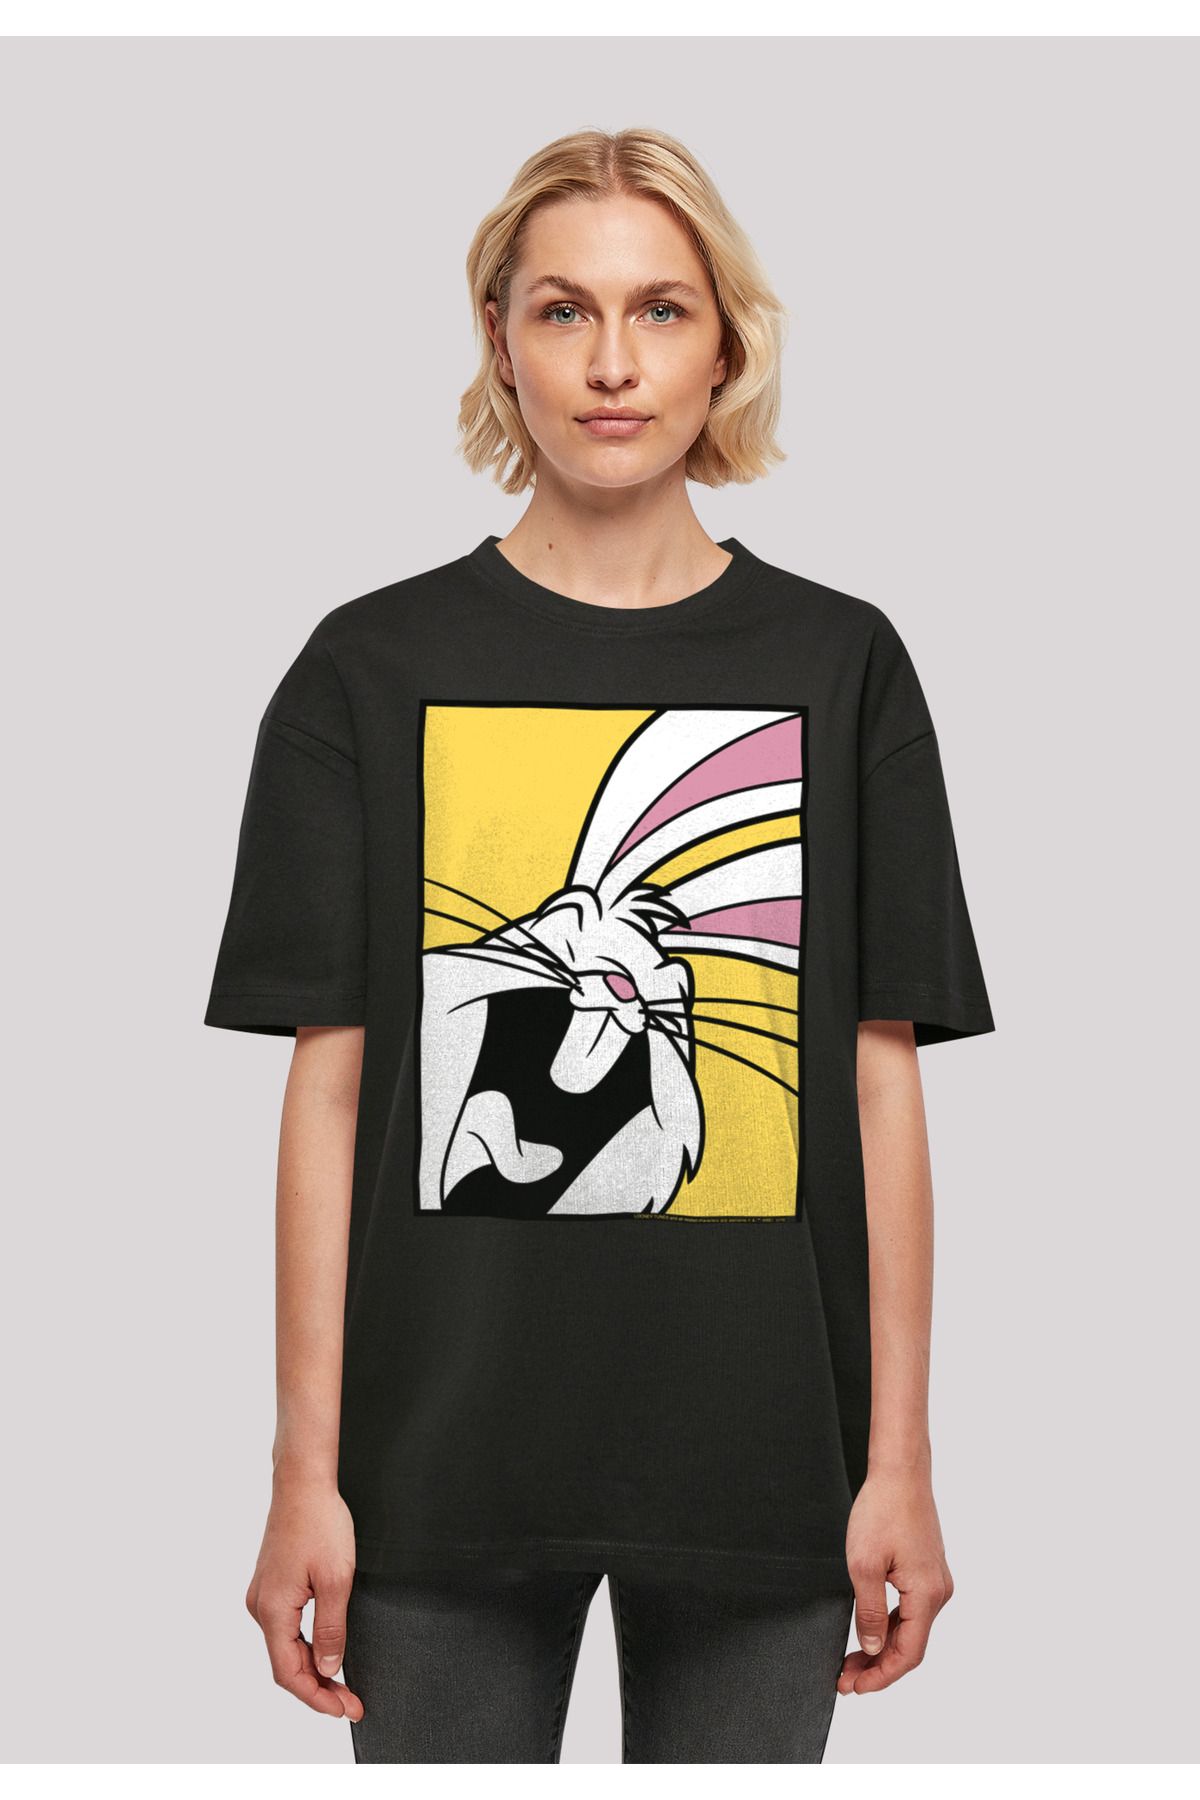 Boyfriend Bugs Oversized Tunes Bunny T-Shirt Trendyol Damen Looney - F4NT4STIC with Laughing Ladies